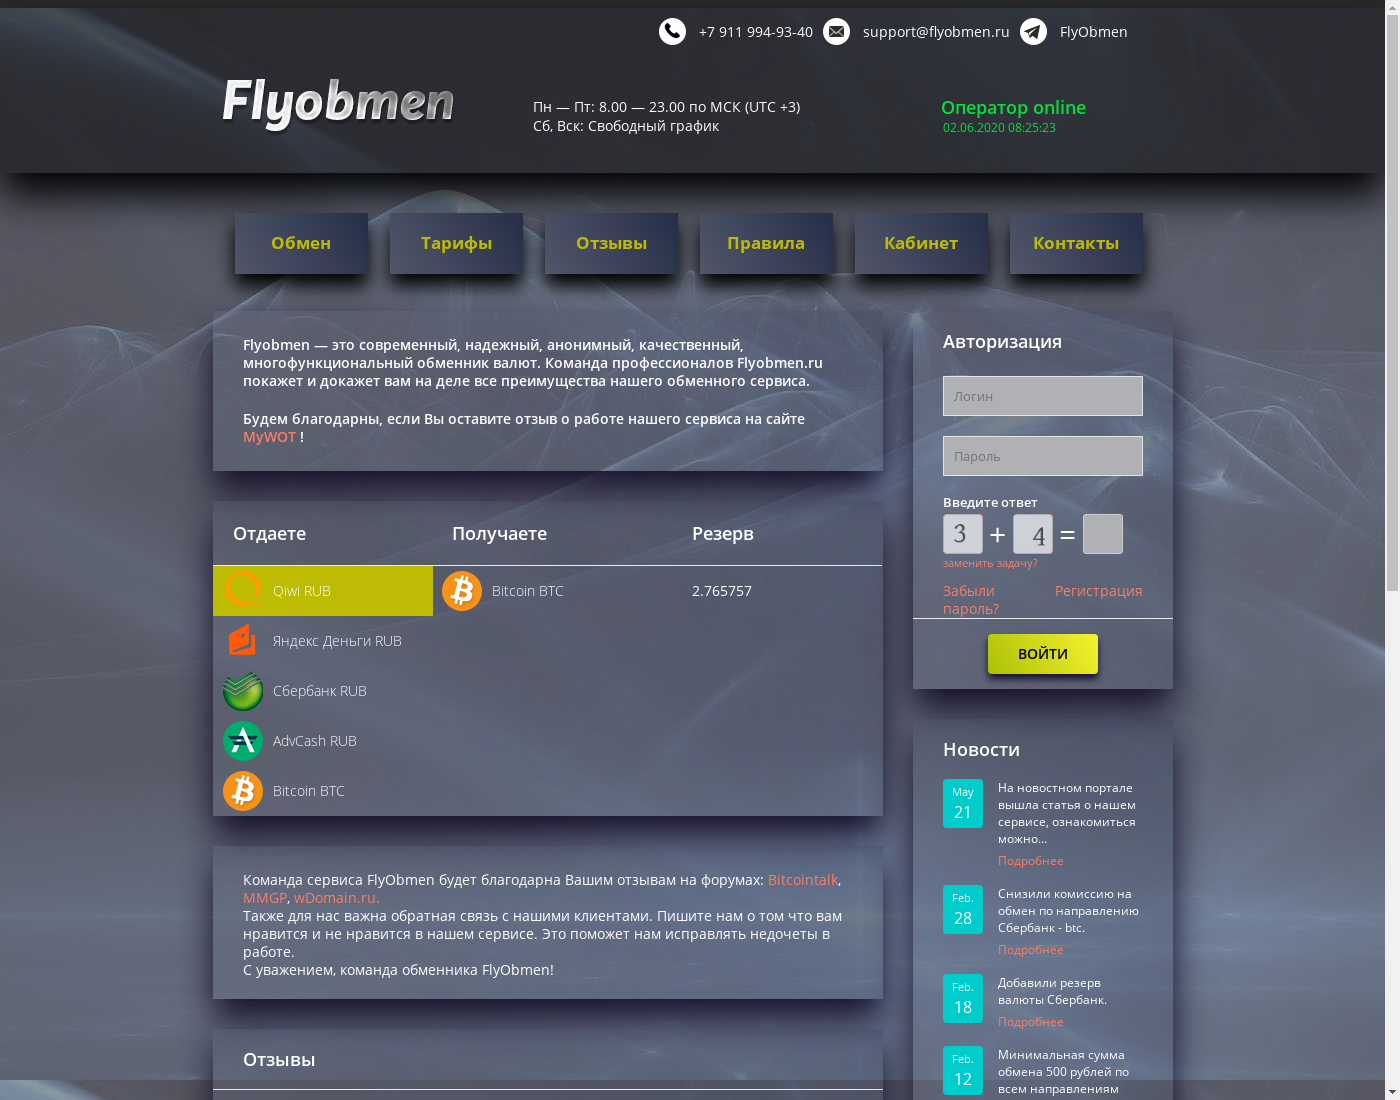 FlyObmen user interface: the home page in English